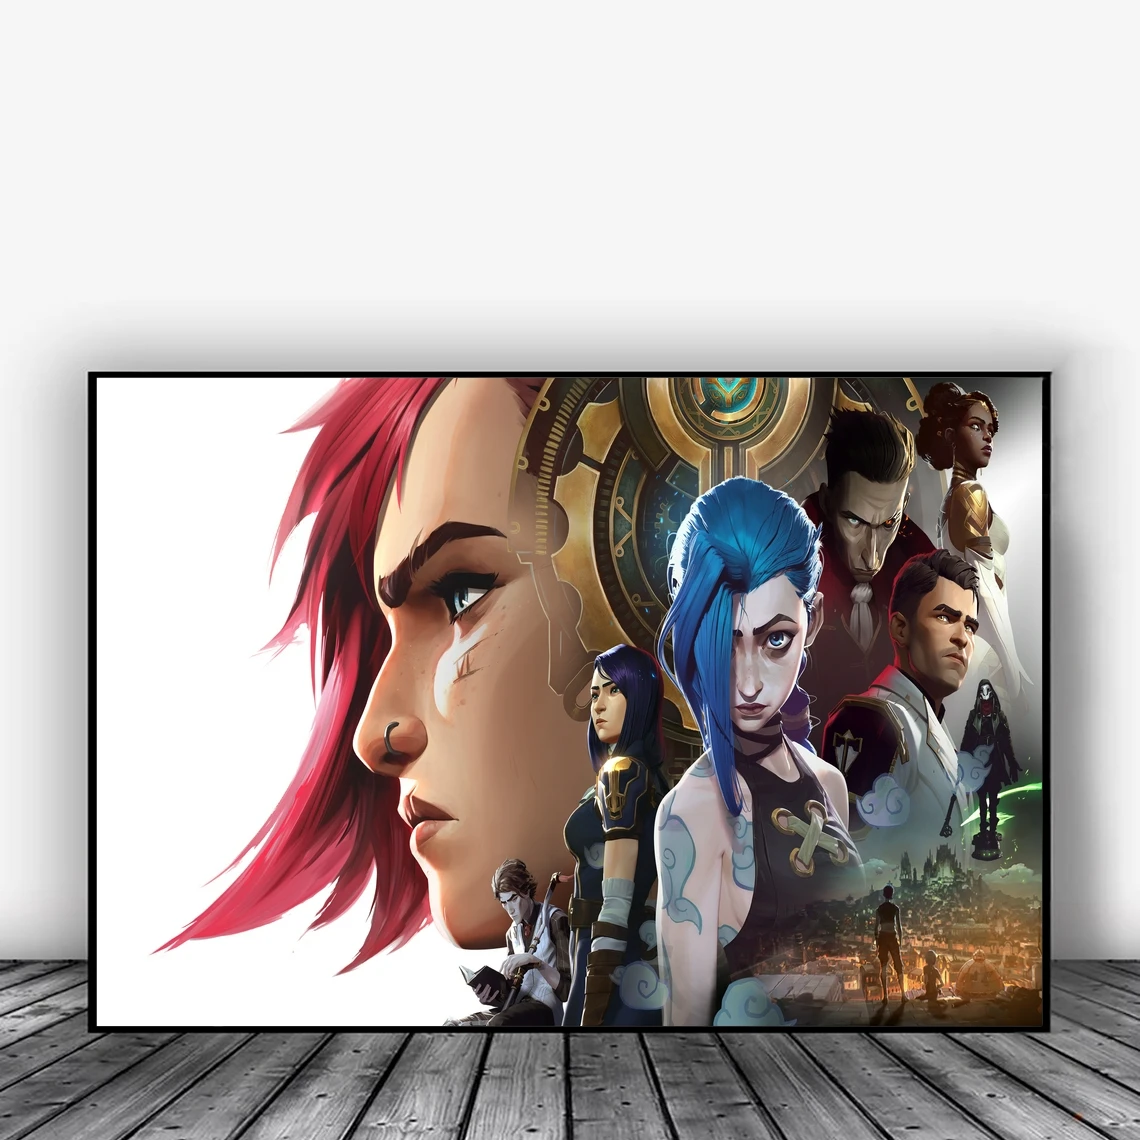 Arcane: League of Legends Poster Animation Cartoon Tv Series Movie,League  Of Legends Game Poster Print Home Decor Wall Painting|Vẽ Tranh & Thư Pháp|  - AliExpress